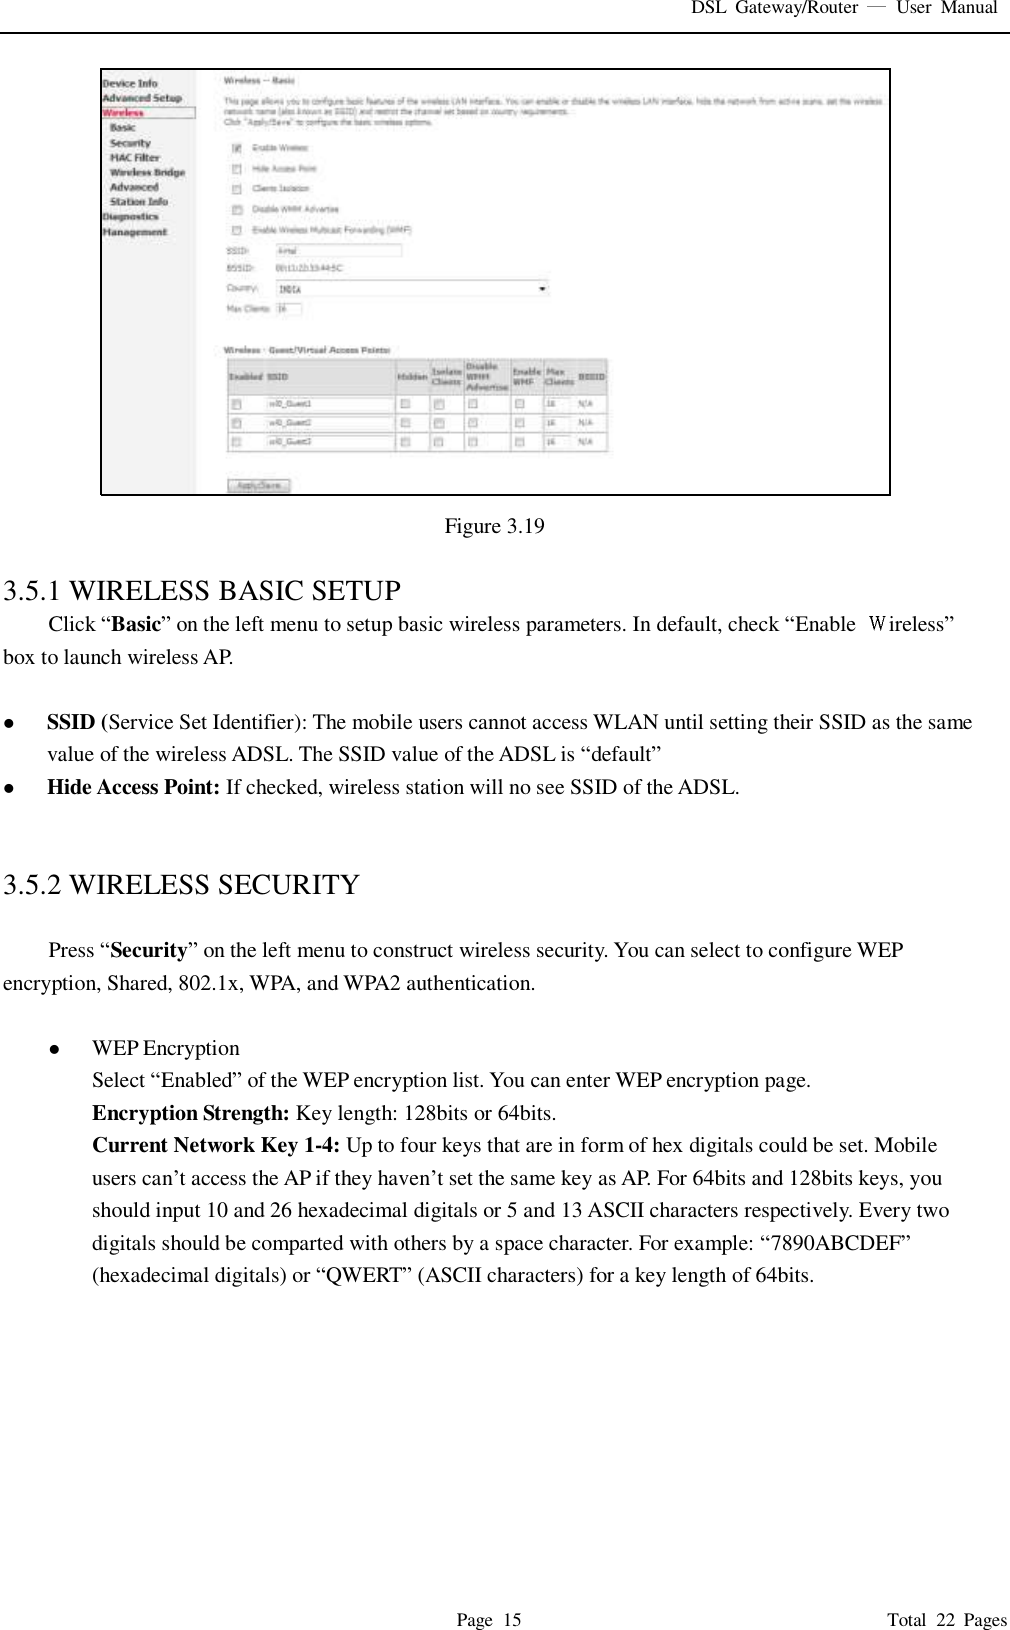 DSL  Gateway/Router    User  Manual   Page  15                                                                              Total  22  Pages  Figure 3.19  3.5.1 WIRELESS BASIC SETUP Click “Basic” on the left menu to setup basic wireless parameters. In default, check “Enable  ireless” box to launch wireless AP.     SSID (Service Set Identifier): The mobile users cannot access WLAN until setting their SSID as the same value of the wireless ADSL. The SSID value of the ADSL is “default”  Hide Access Point: If checked, wireless station will no see SSID of the ADSL.   3.5.2 WIRELESS SECURITY  Press “Security” on the left menu to construct wireless security. You can select to configure WEP encryption, Shared, 802.1x, WPA, and WPA2 authentication.   WEP Encryption Select “Enabled” of the WEP encryption list. You can enter WEP encryption page. Encryption Strength: Key length: 128bits or 64bits. Current Network Key 1-4: Up to four keys that are in form of hex digitals could be set. Mobile users can’t access the AP if they haven’t set the same key as AP. For 64bits and 128bits keys, you should input 10 and 26 hexadecimal digitals or 5 and 13 ASCII characters respectively. Every two digitals should be comparted with others by a space character. For example: “7890ABCDEF” (hexadecimal digitals) or “QWERT” (ASCII characters) for a key length of 64bits.    